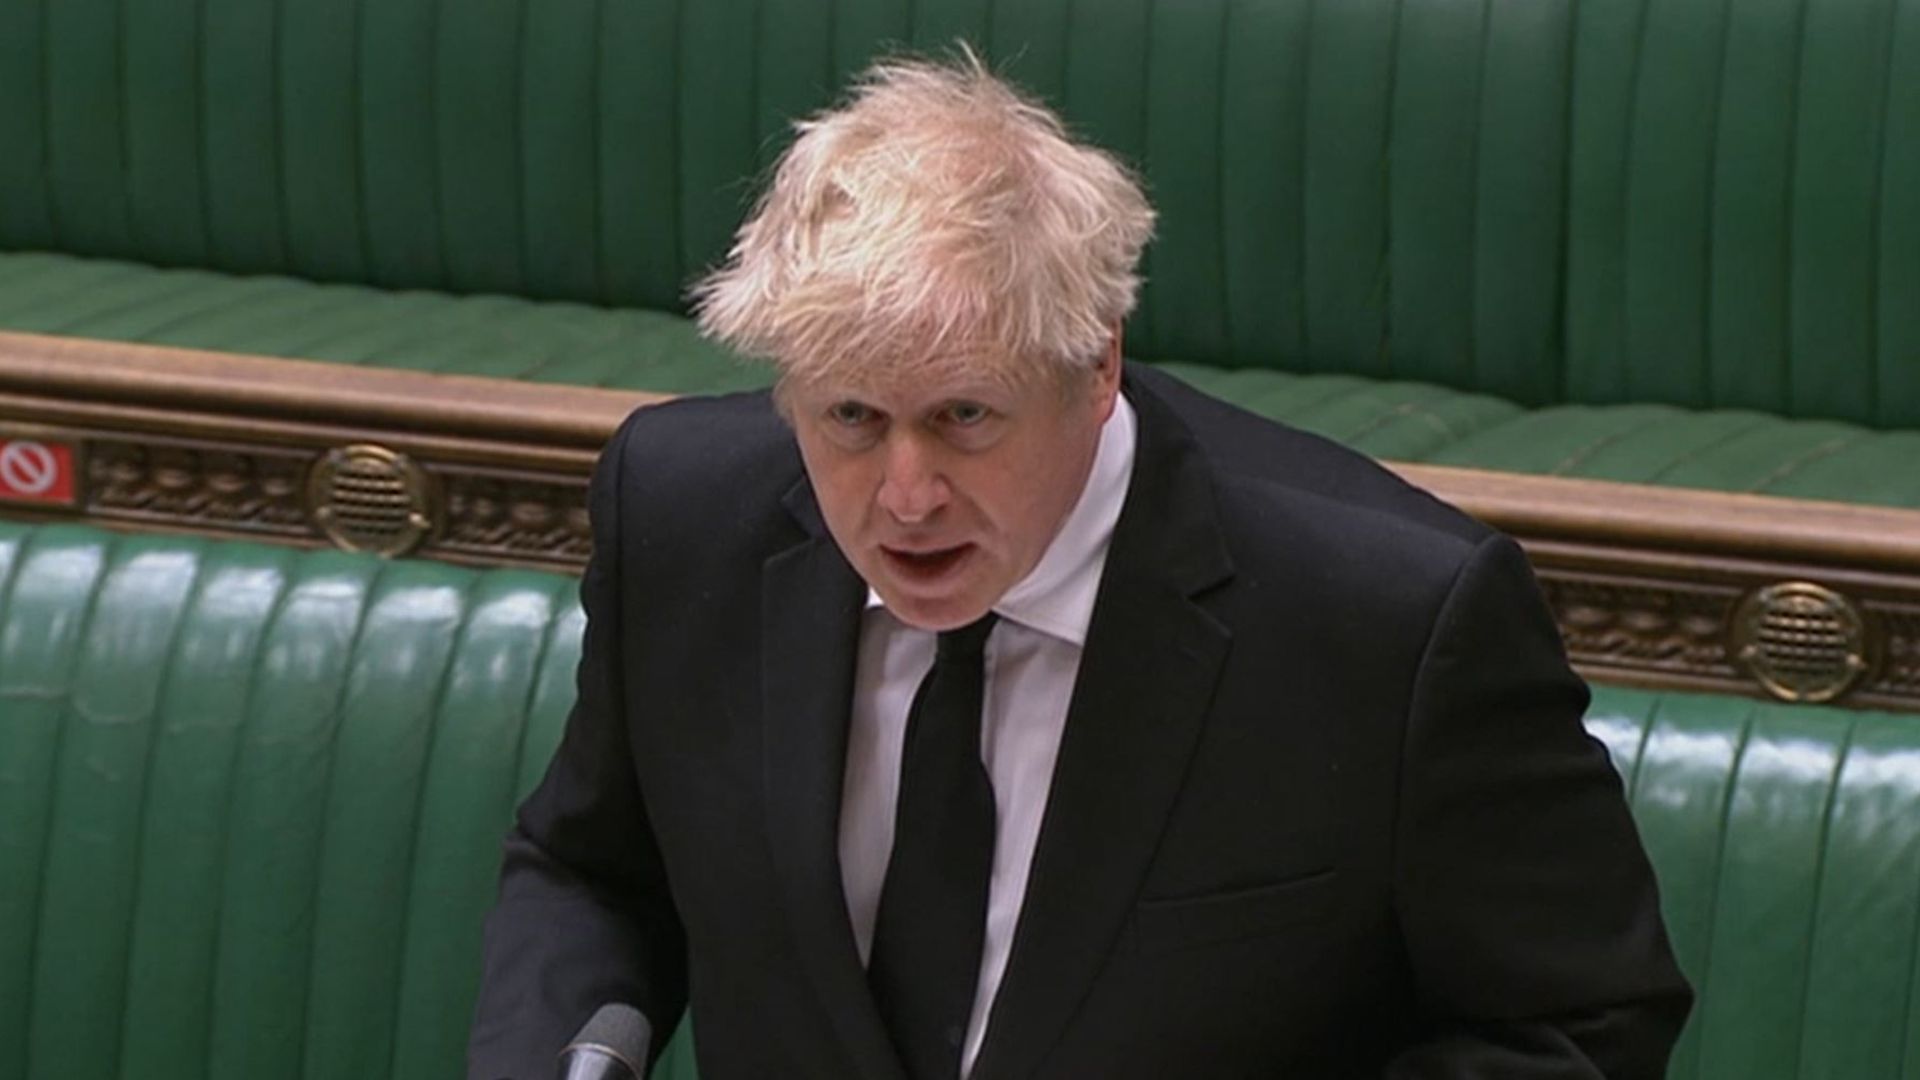 Prime minister Boris Johnson speaks during Prime Minister's Questions in the House of Commons, London - Credit: PA